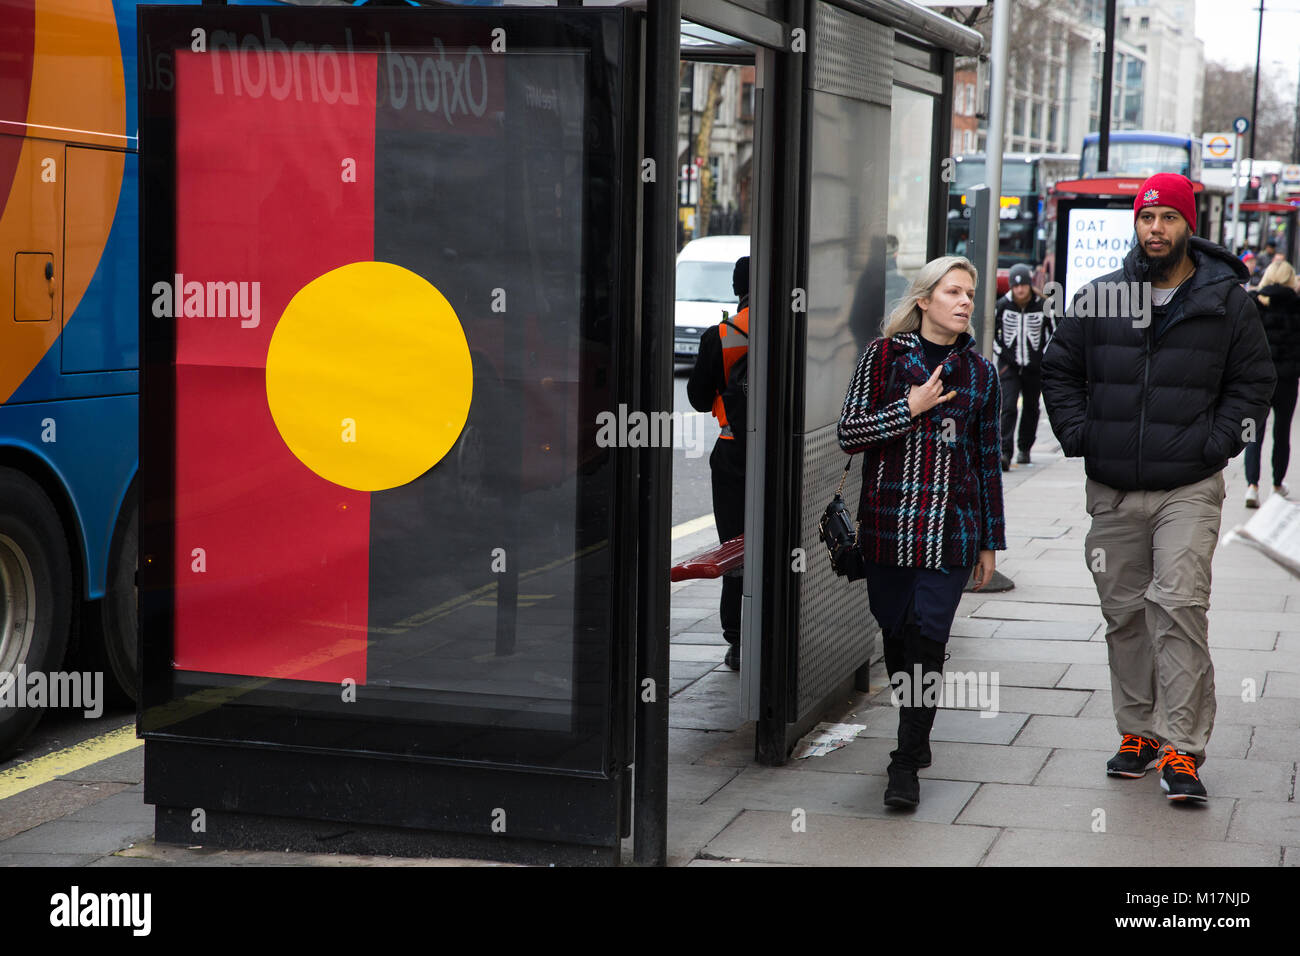 London, UK. 27th January, 2018. A number of Australian Aboriginal flags appeared around London on Australia Day. The celebration of Australia Day is controversial and tens of thousands of protesters marched against it on the streets of Australia. Many, including aboriginal activists, have called for the abolition of Australia Day, often referred to by critics as Invasion Day or Survival Day. Credit: Mark Kerrison/Alamy Live News Stock Photo